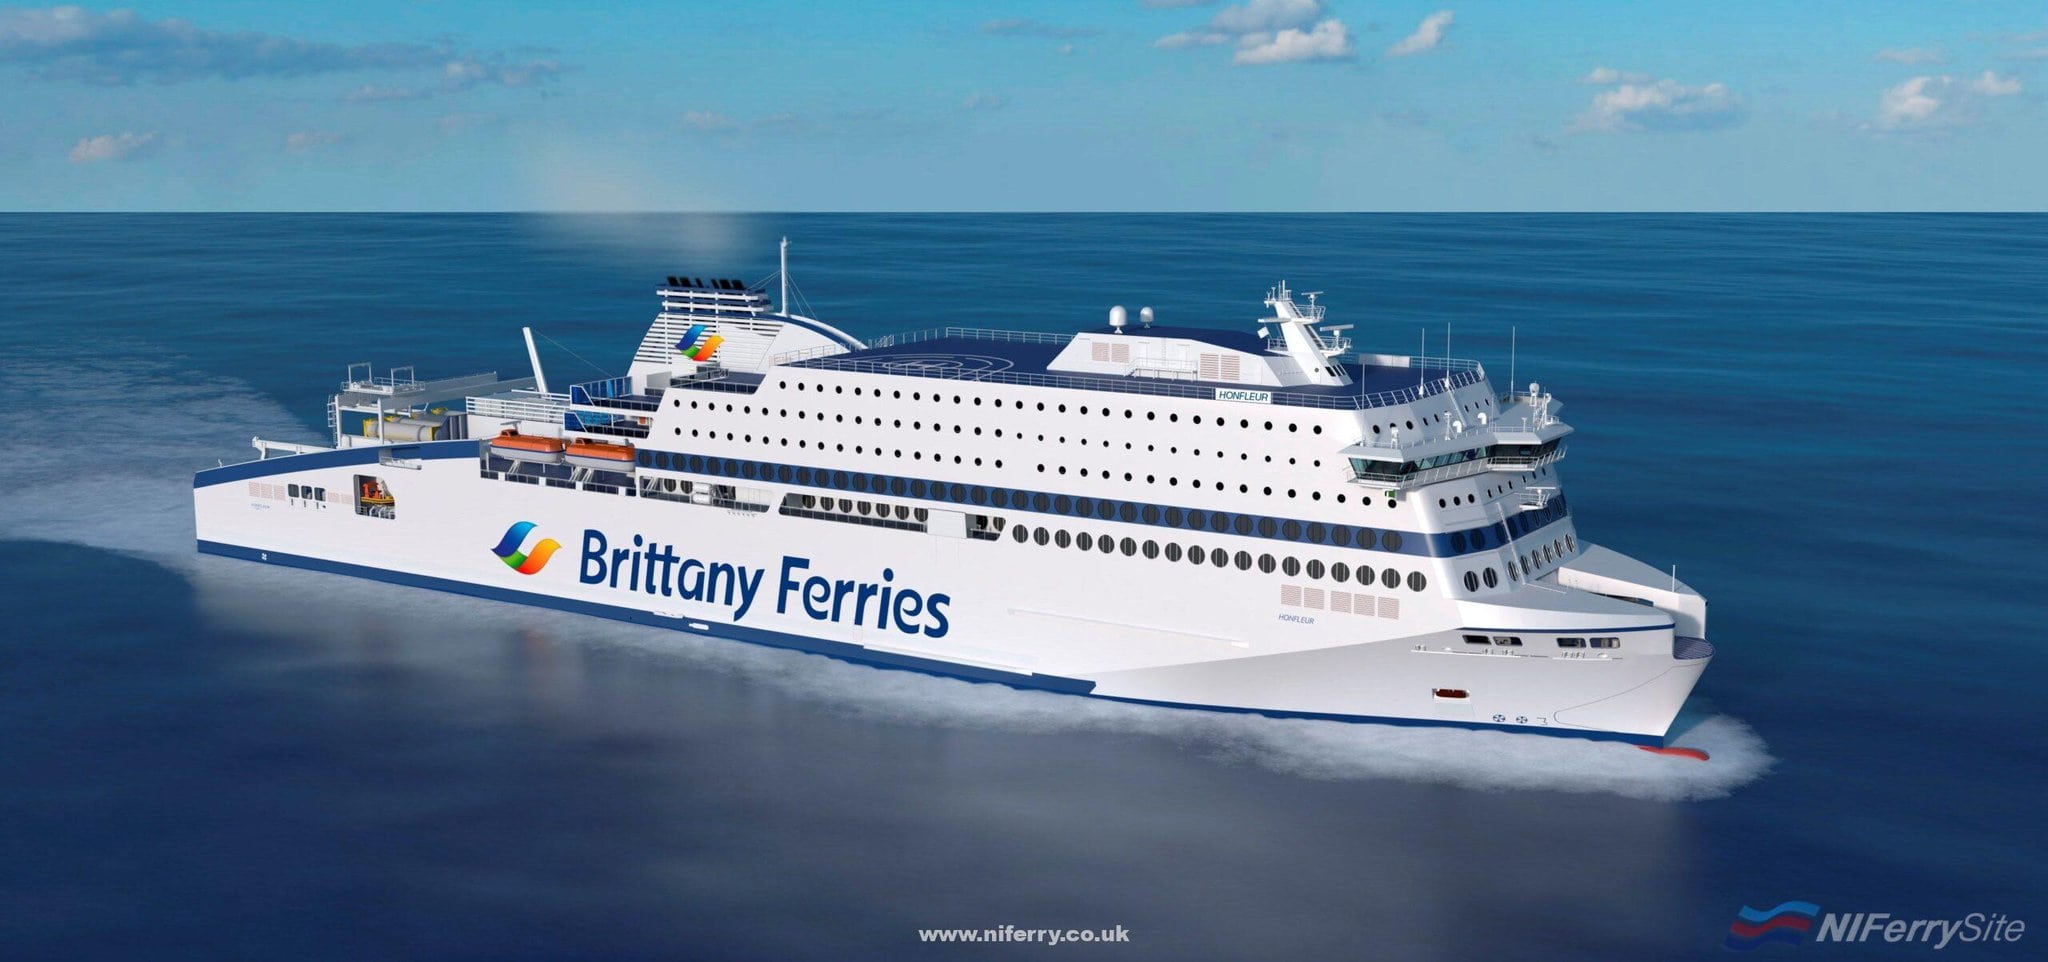 Render of Brittany Ferries HONFLEUR wearing the new livery for the 2019 season. Brittany Ferries.